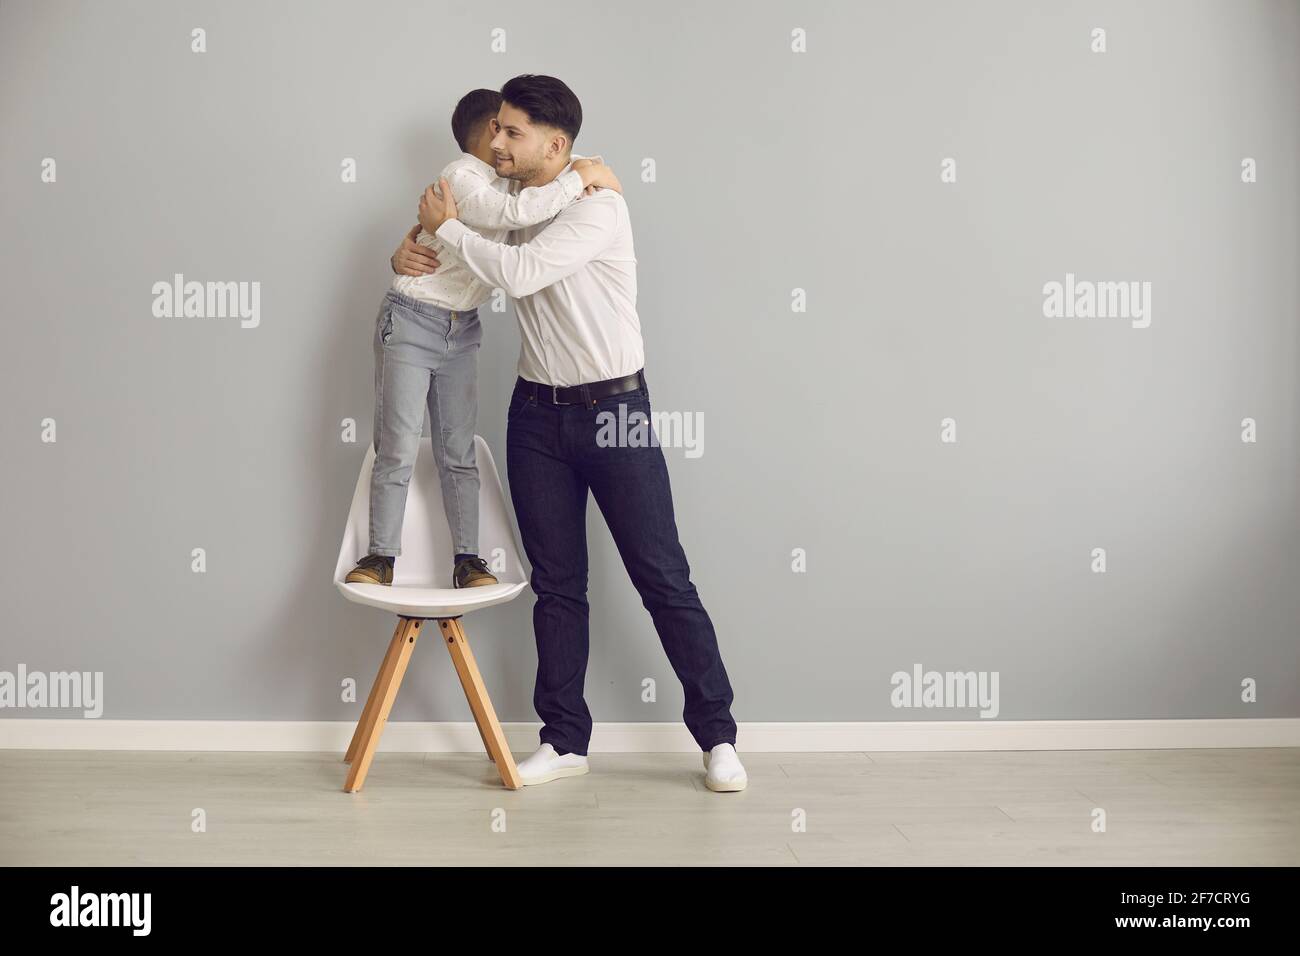 Loving father tightly hugging adorable son standing on chair studio portrait Stock Photo